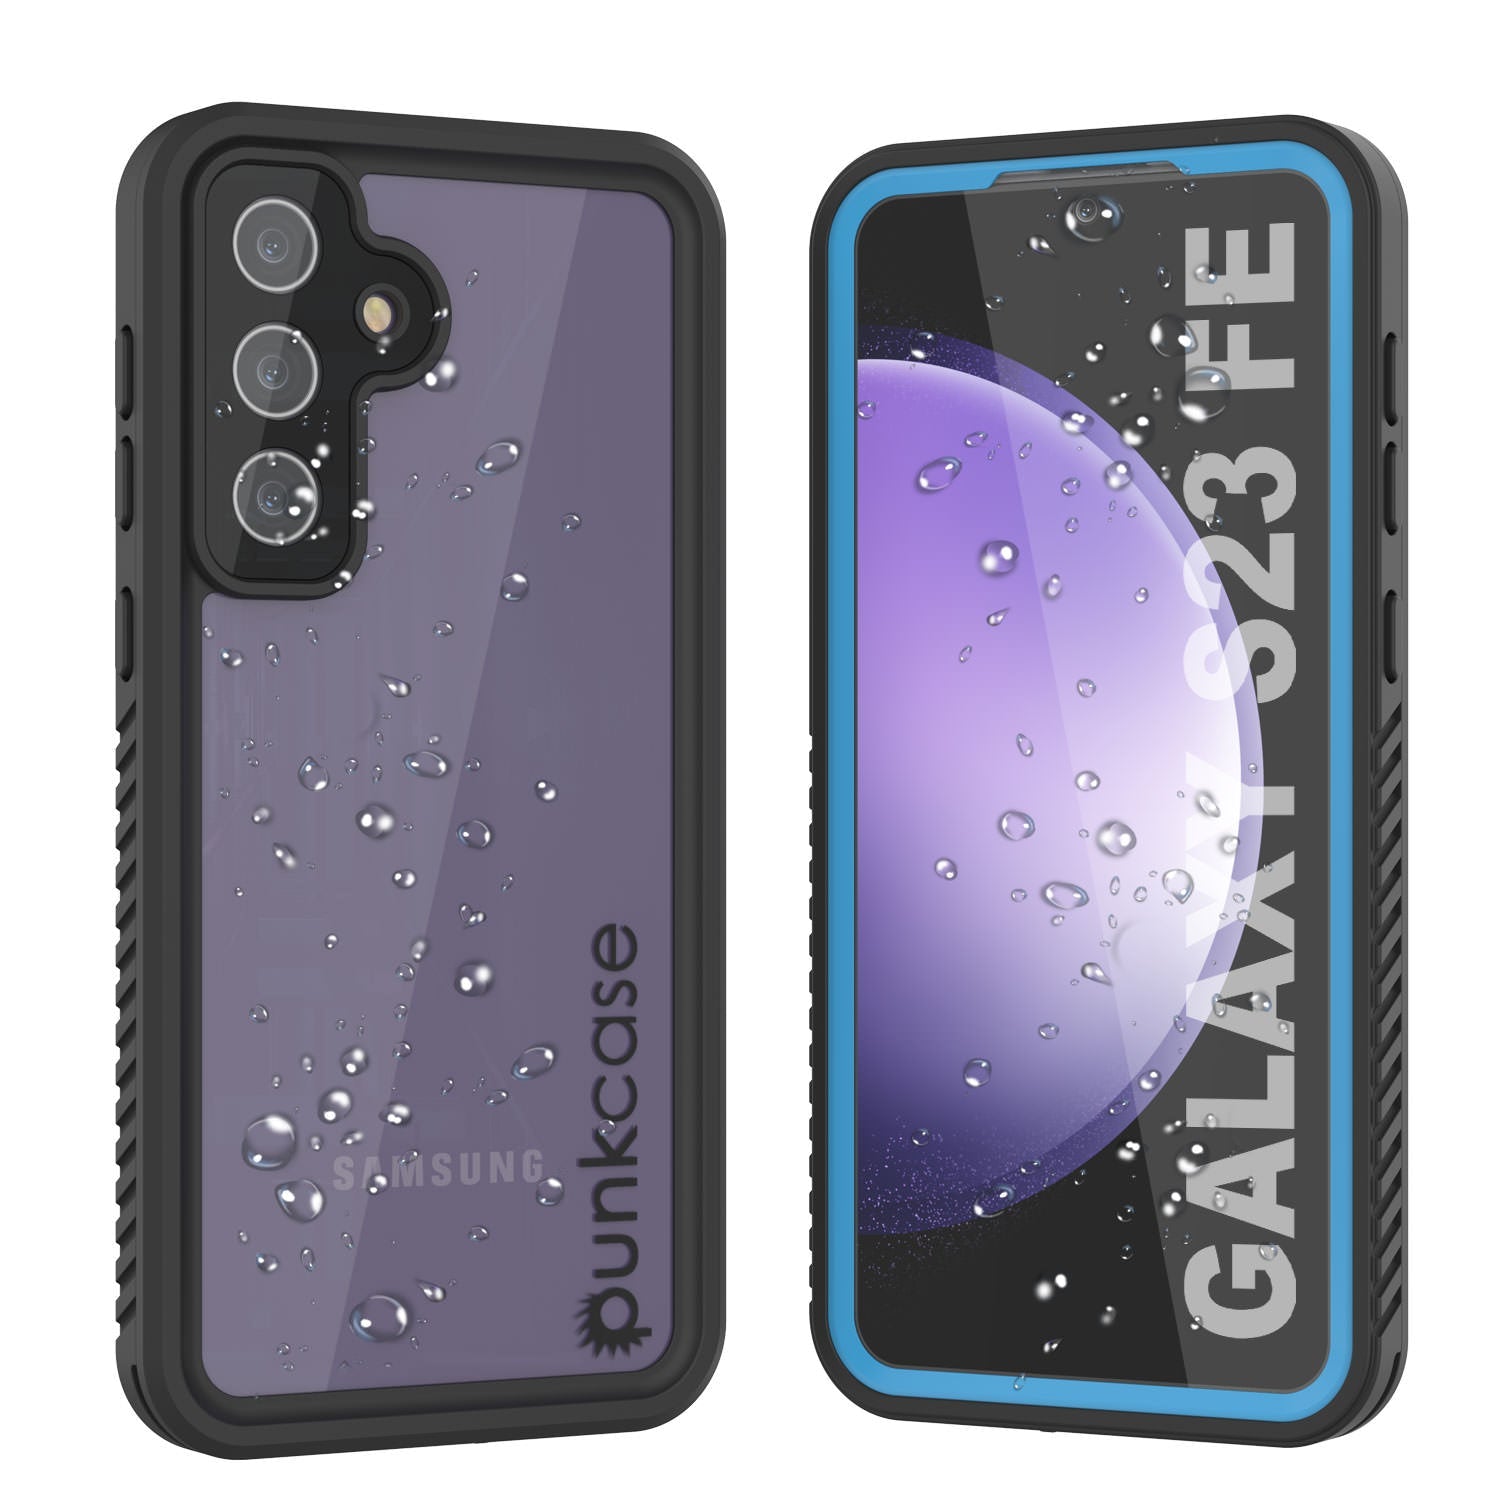 Galaxy S23 FE Water, Shock, Snow, dirt proof Extreme Series Slim Case [Light Blue]